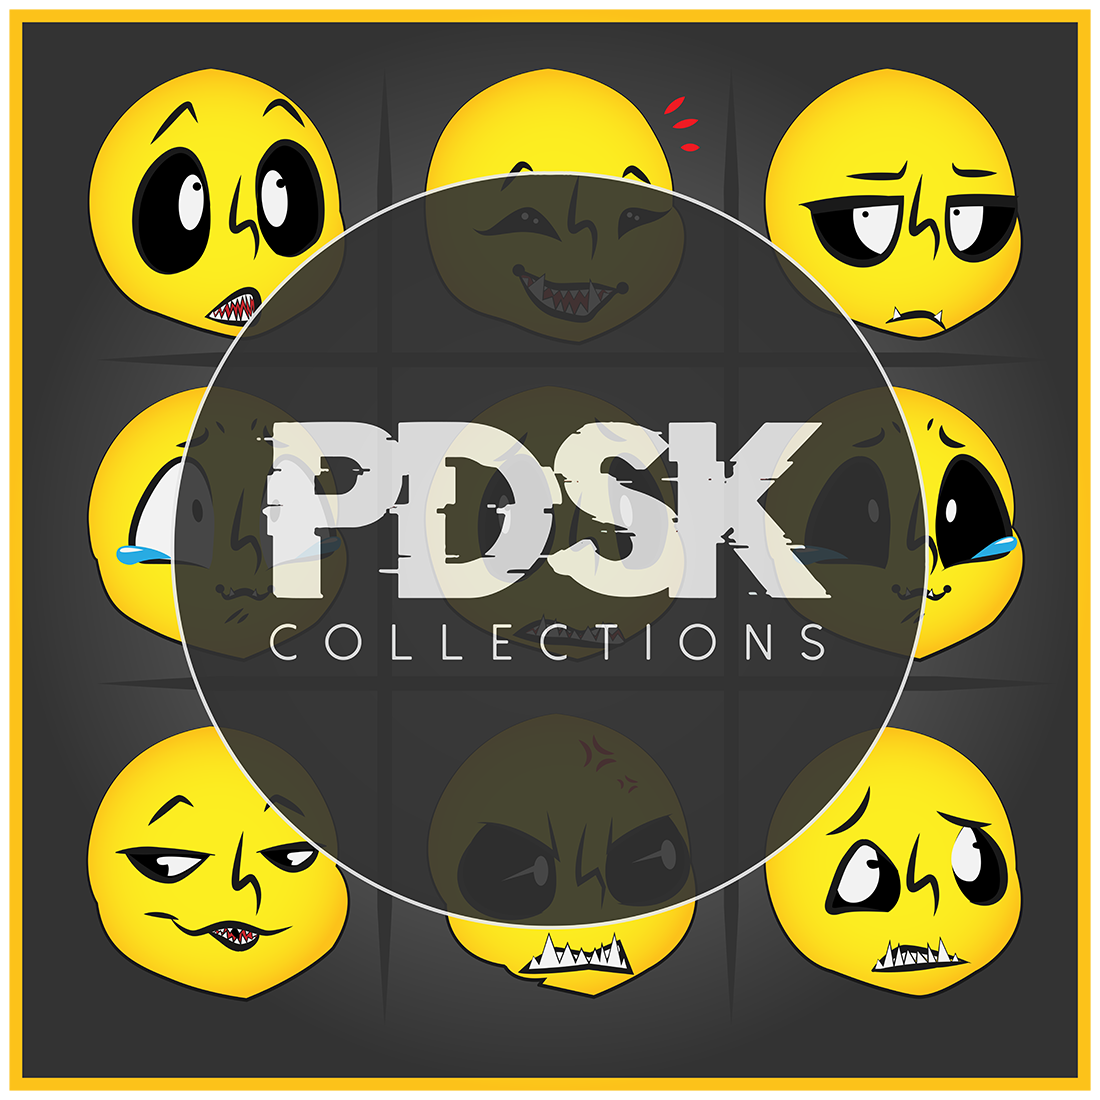 Cool Pdsk Emoticons Face Character Super High Res cover image.